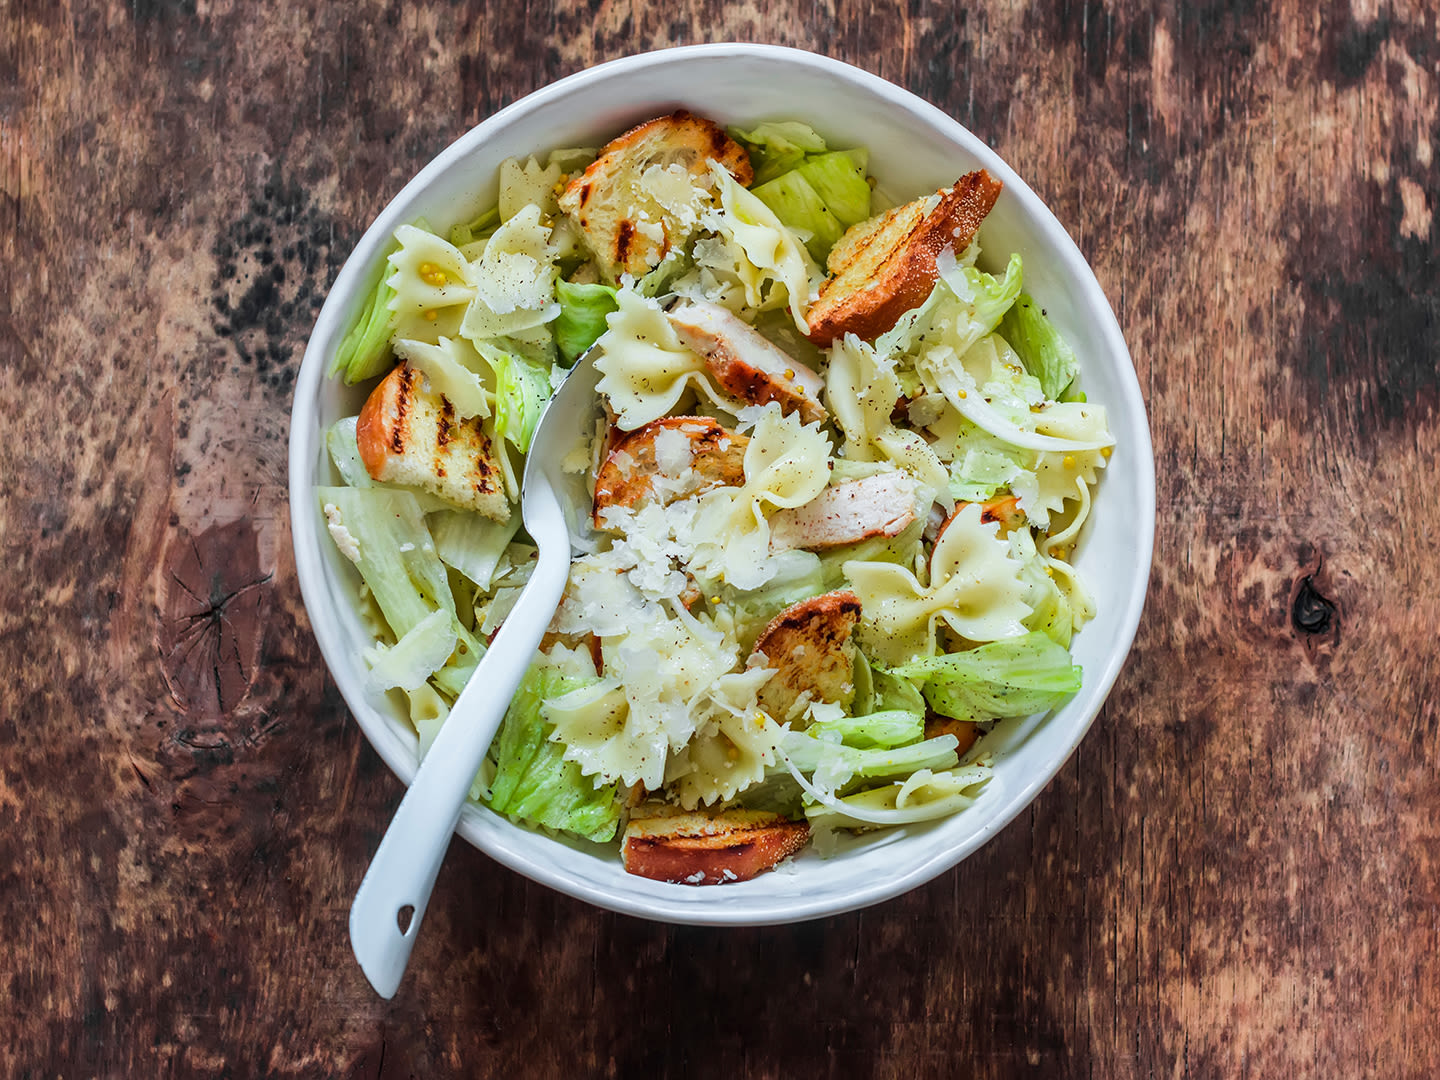 The Pioneer Woman's Transformative Take On Pasta Salad Makes it Entrée-Worthy